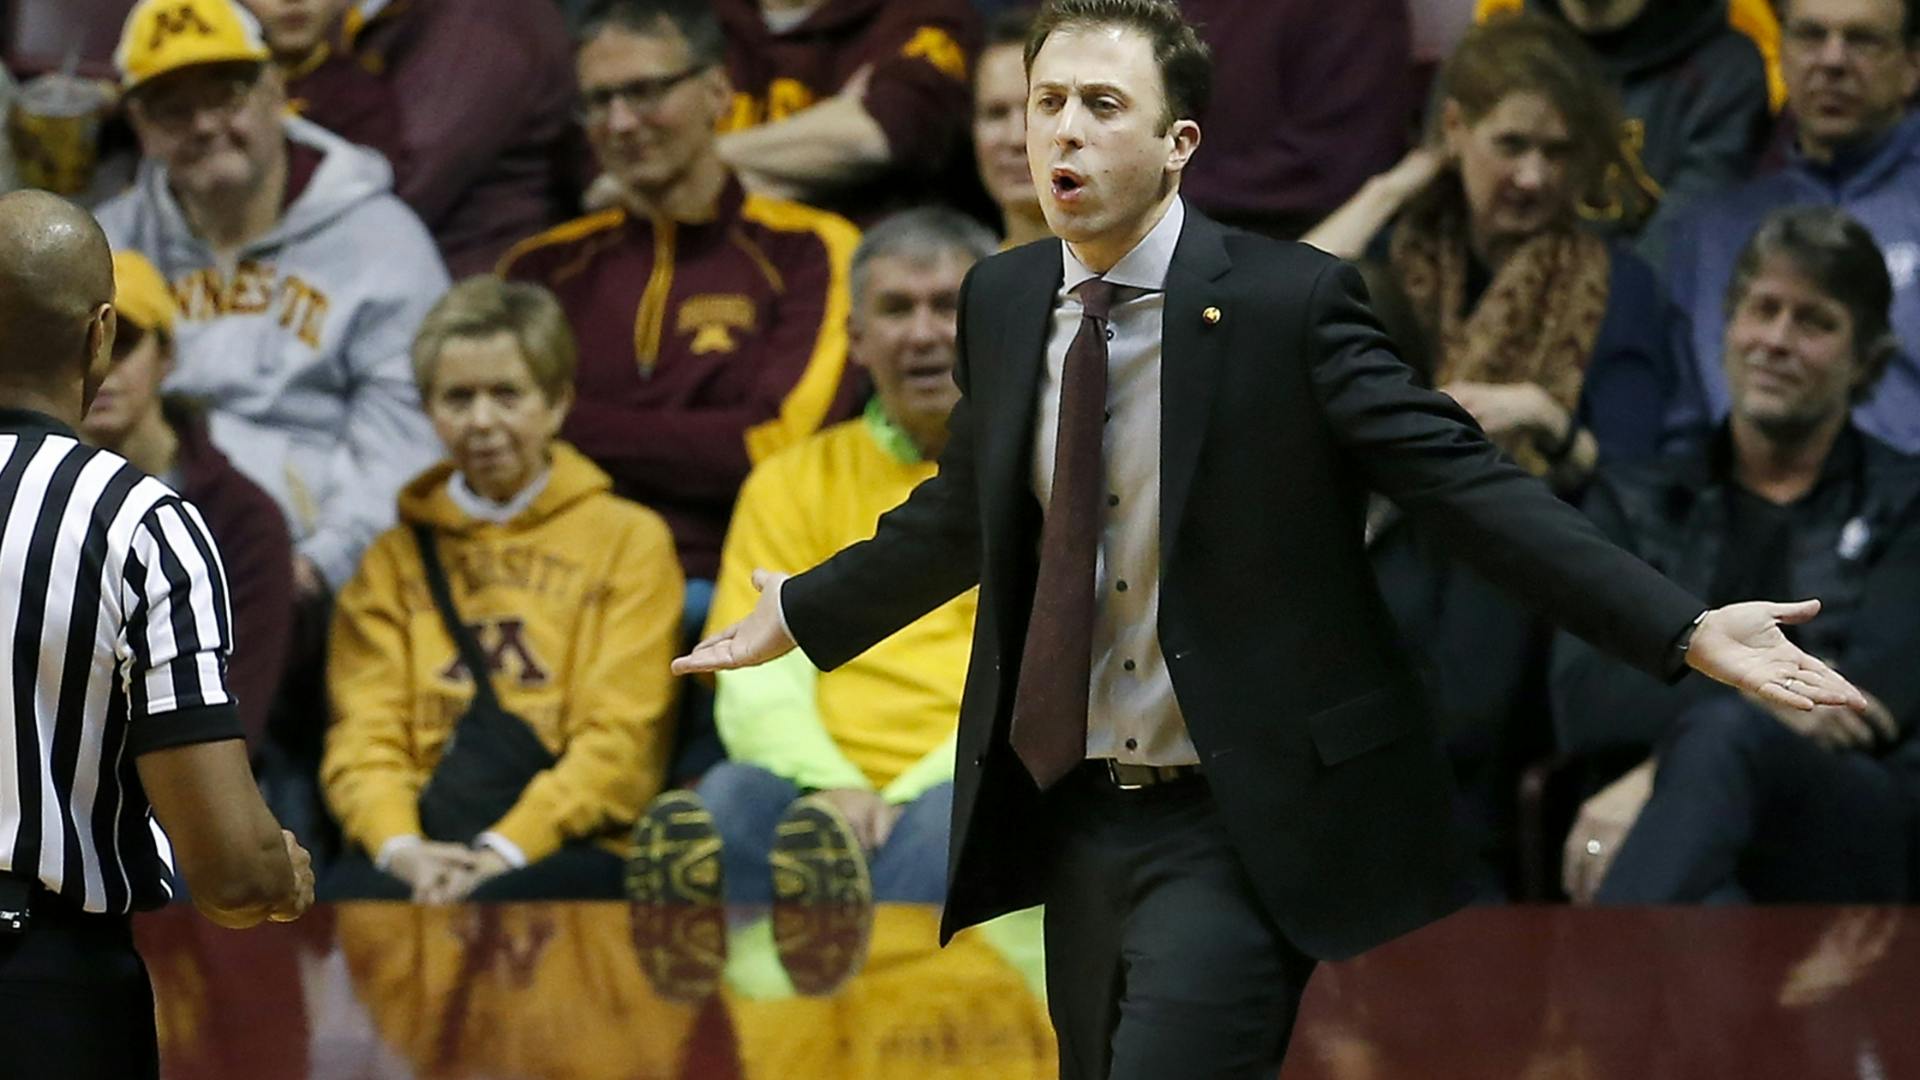 The Minnesota coach reflected on what went wrong in the Gophers big chance to tie the game with 49 seconds left.